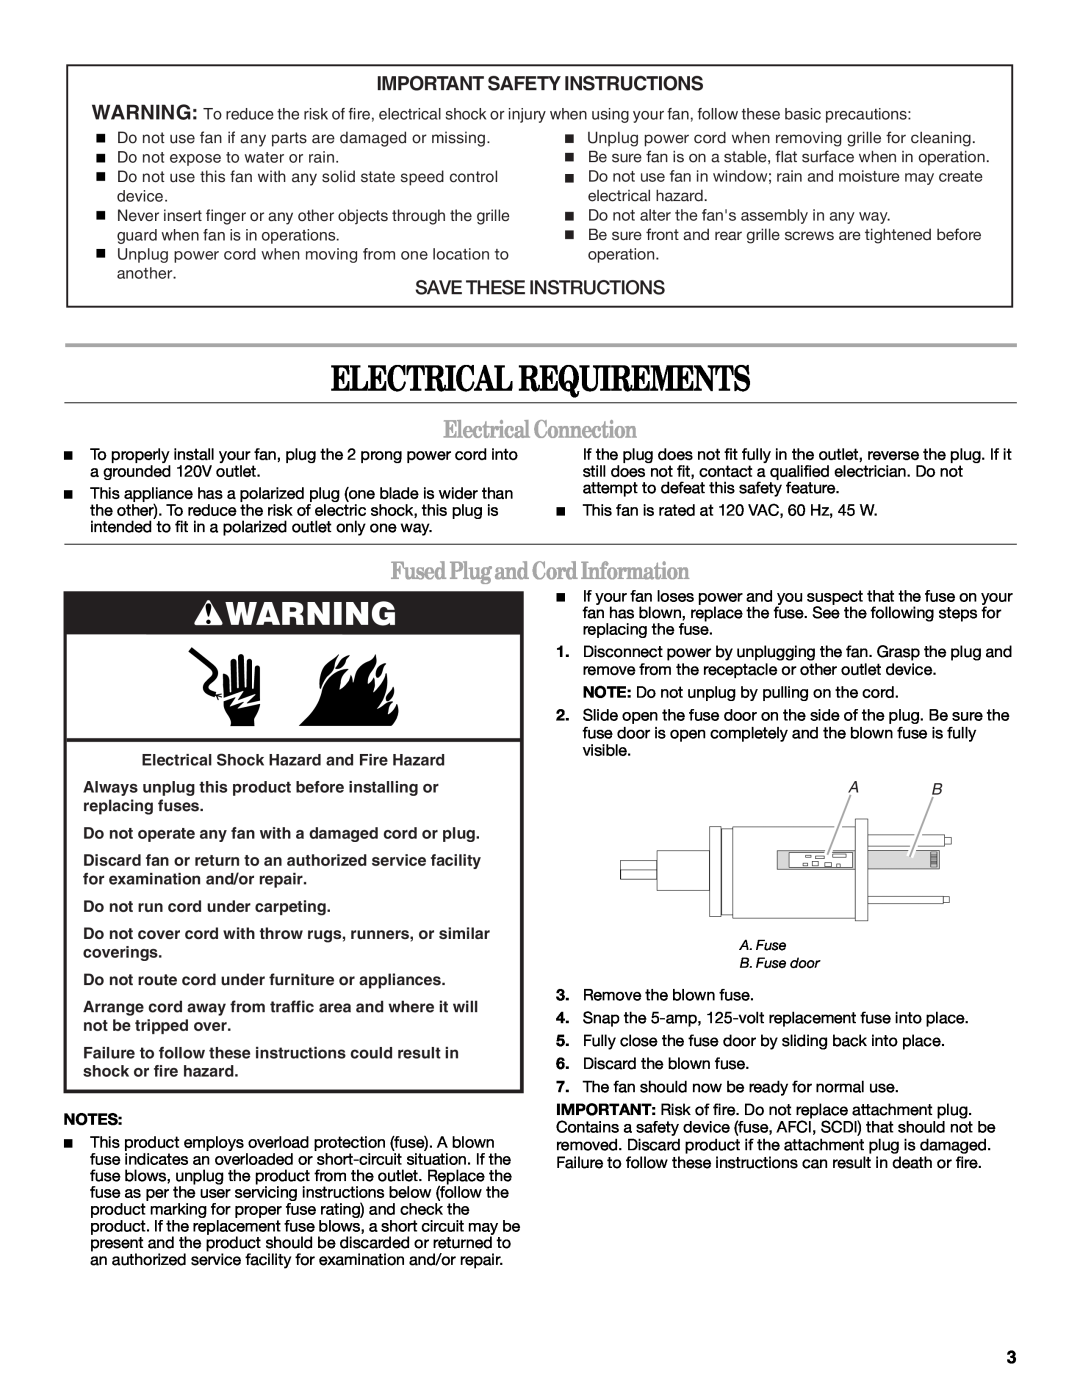 Whirlpool WF4235ER1 manual Electrical Requirements, Electrical Connection, Fused Plug and Cord Information 